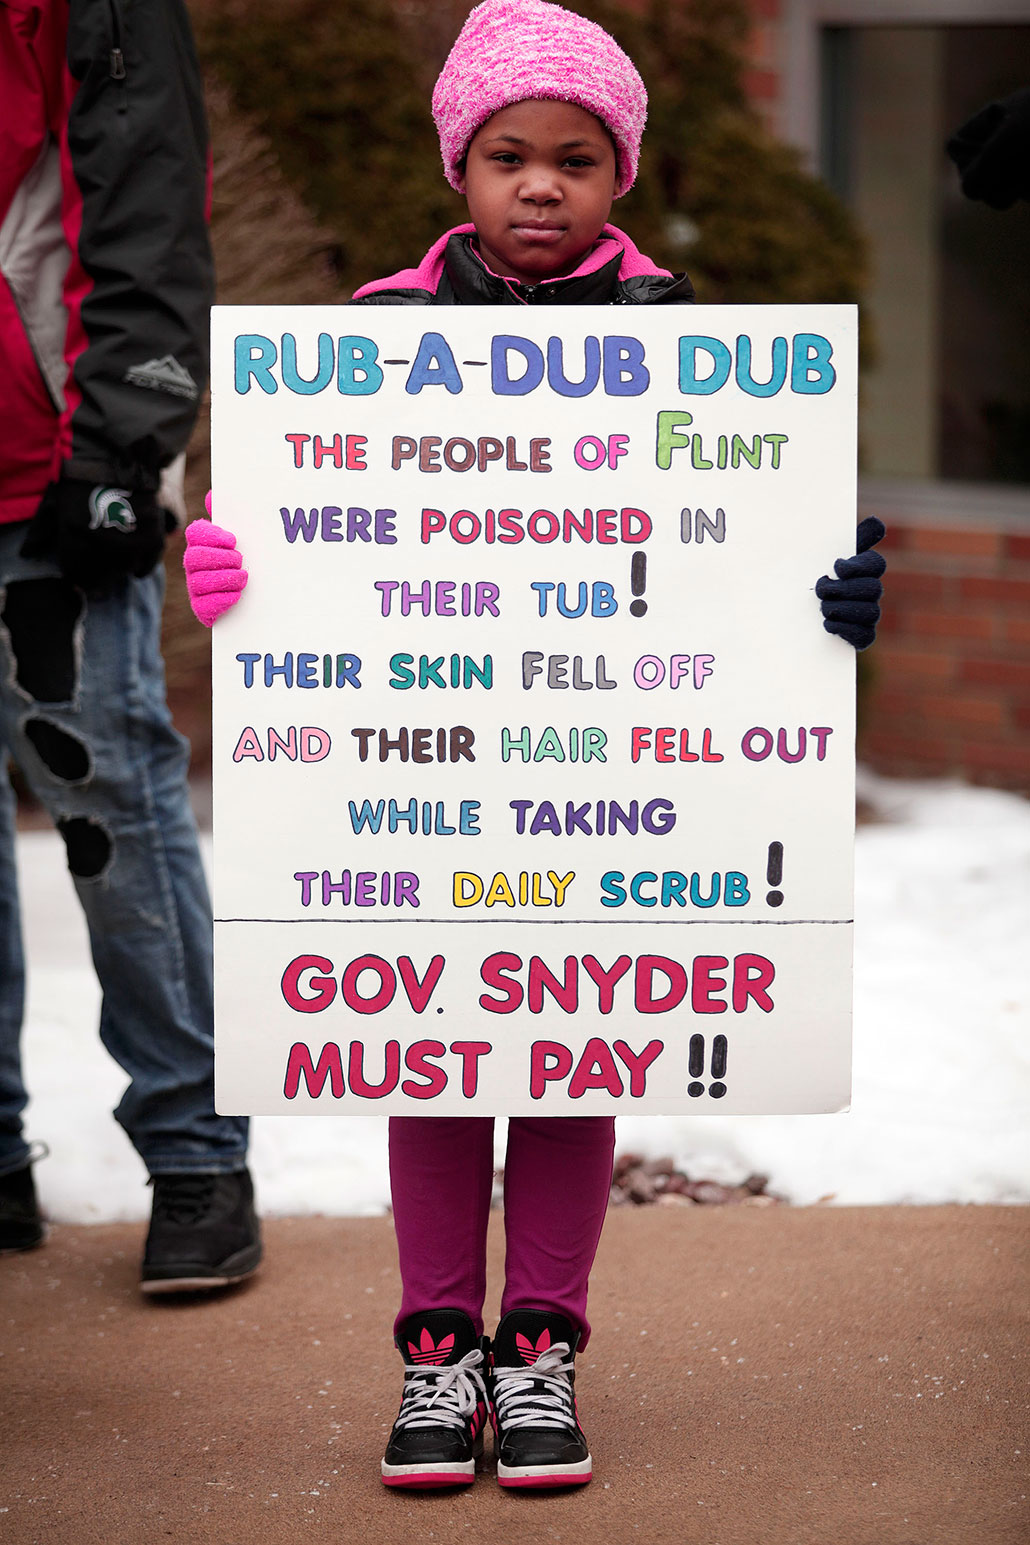 a photo of a young Black girl wearing a pink hat holding a poster that reads 'RUB-A-DUB DUB The people of Flint were poisoned in their tub! Their skin fell off and their hair fell out while taking their daily scrub! Gov. Snyder must pay!'